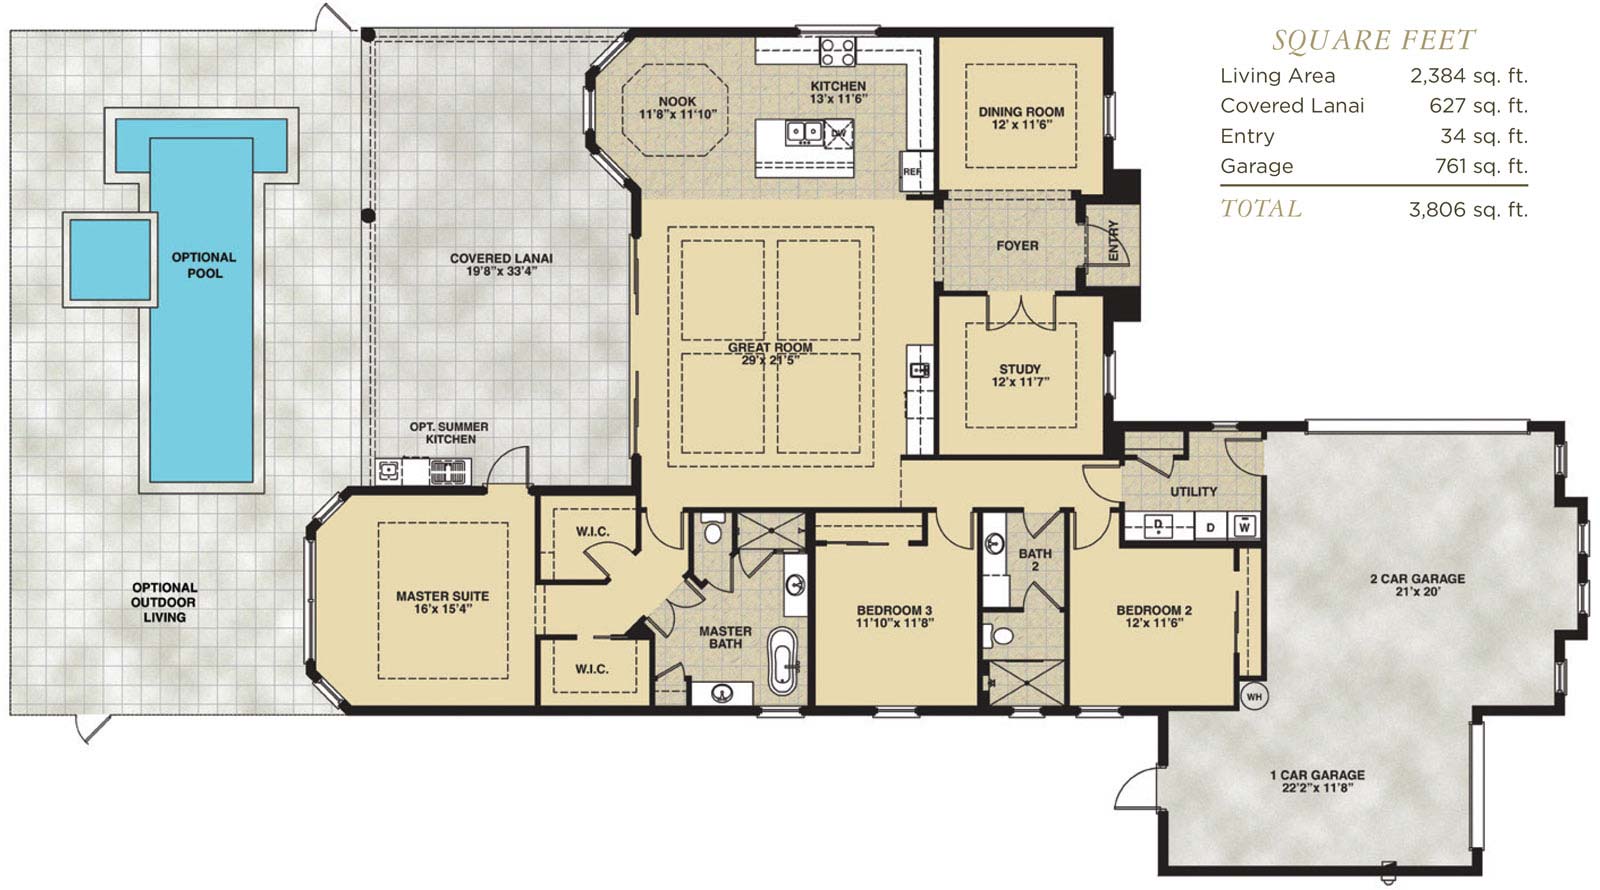 Biscayne Floor Plan in Hidden Harbor Estates, Fort Myers, Stock Construction, Three Bedroom, Two Bath, Great Room, Dining Room, Study, Covered Lanai, 2-Car Garage and 1-Car Garage